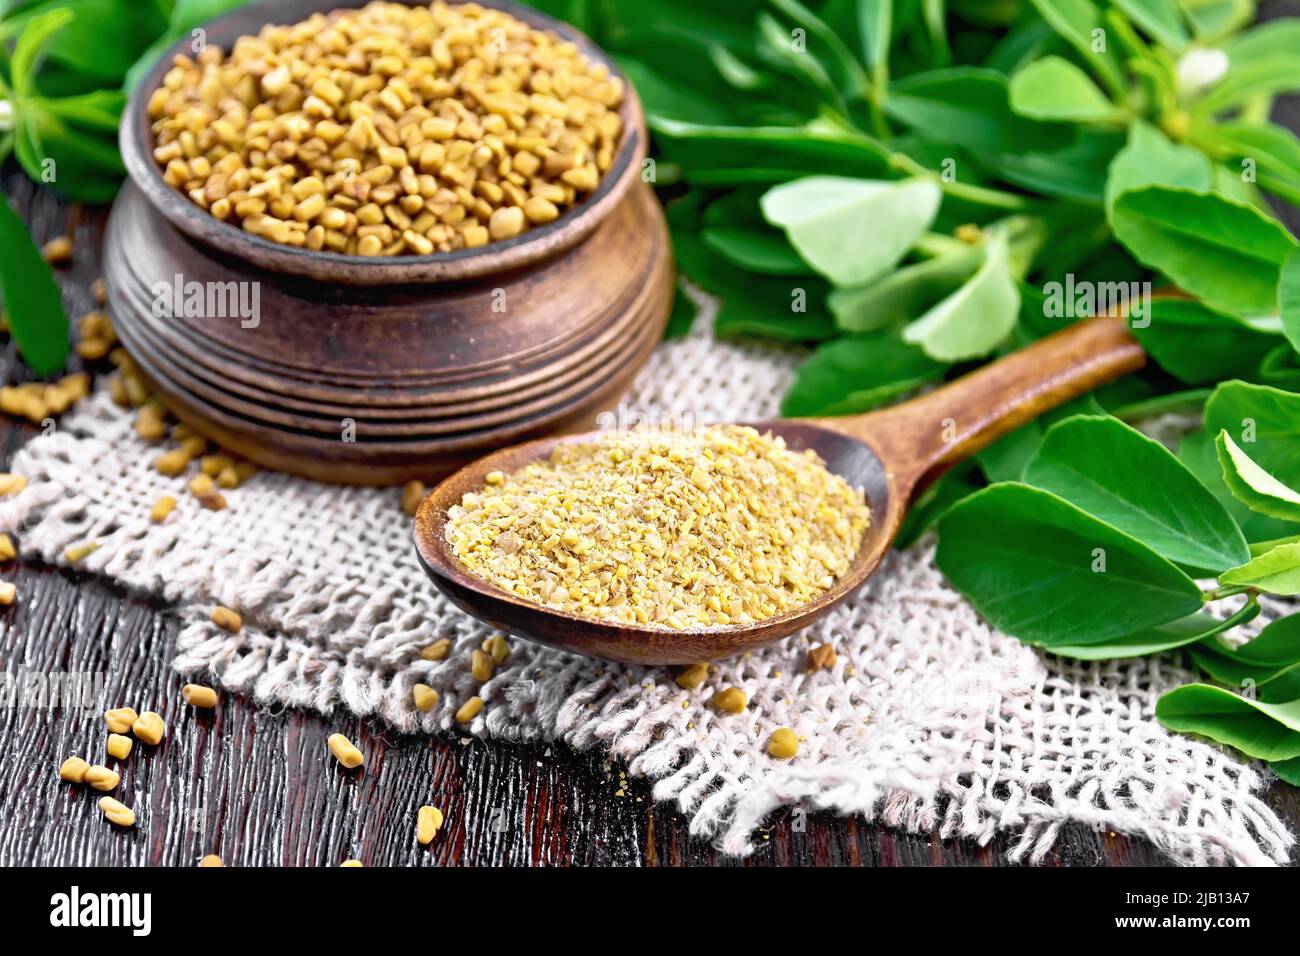 Ground fenugreek in a spoon and seeds in a bowl on a burlap napkin with green leaves against dark wooden board Stock Photo